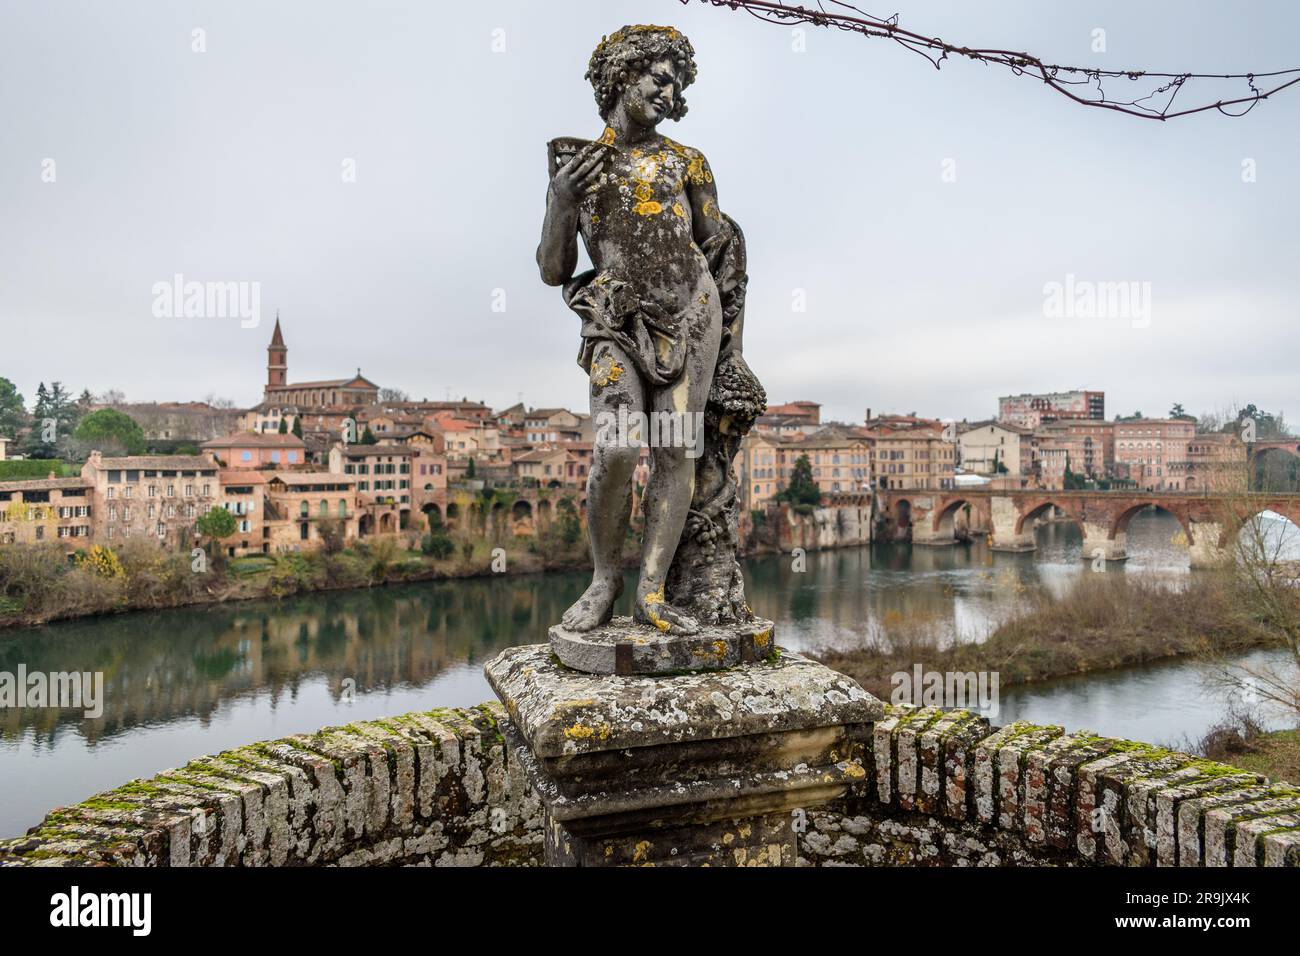 Bacchus state at the Palais de La Berbie bishop's palace gardens, overlooking the River Tarn and the city of Albi. Stock Photo